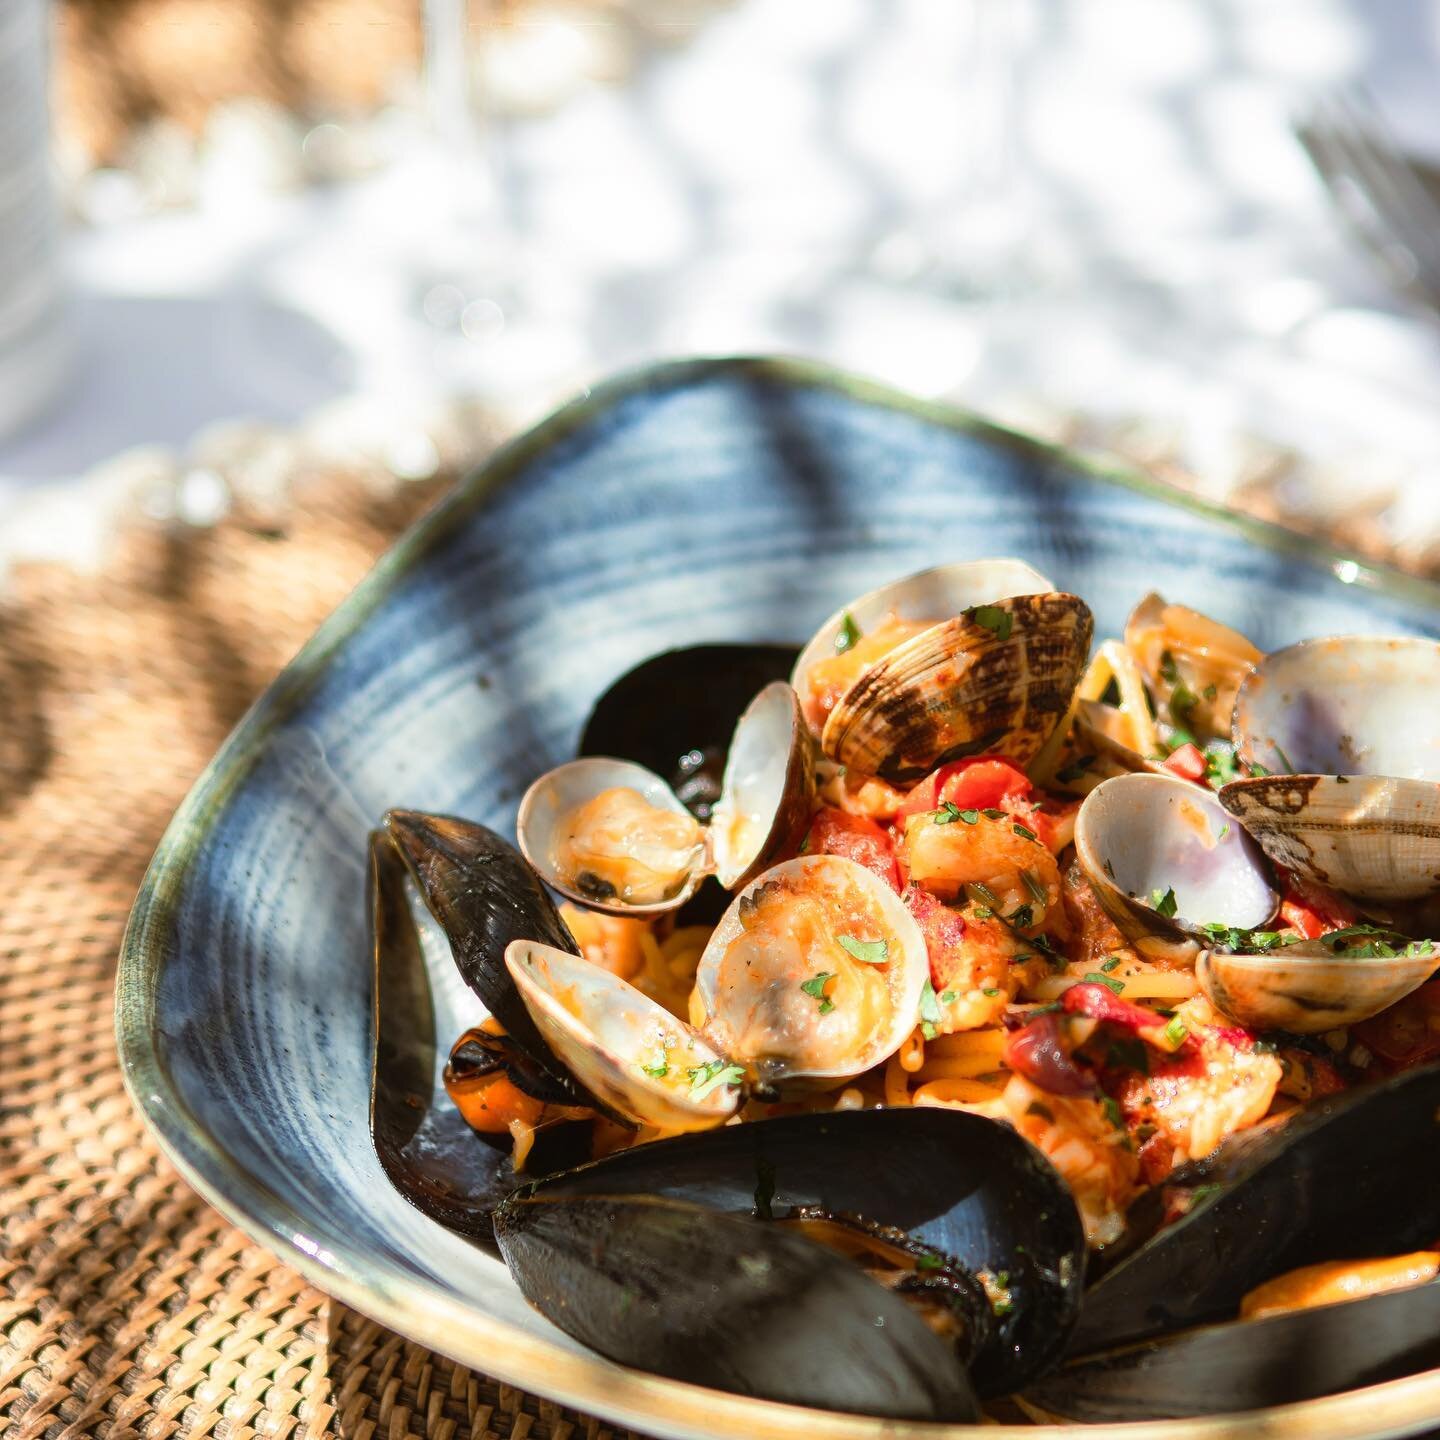 Start September gently with our famous Shellfish Pastas ! 
.
#clublespalmiers #lespalmiers #sainttropez #pampelonne #ramatuelle